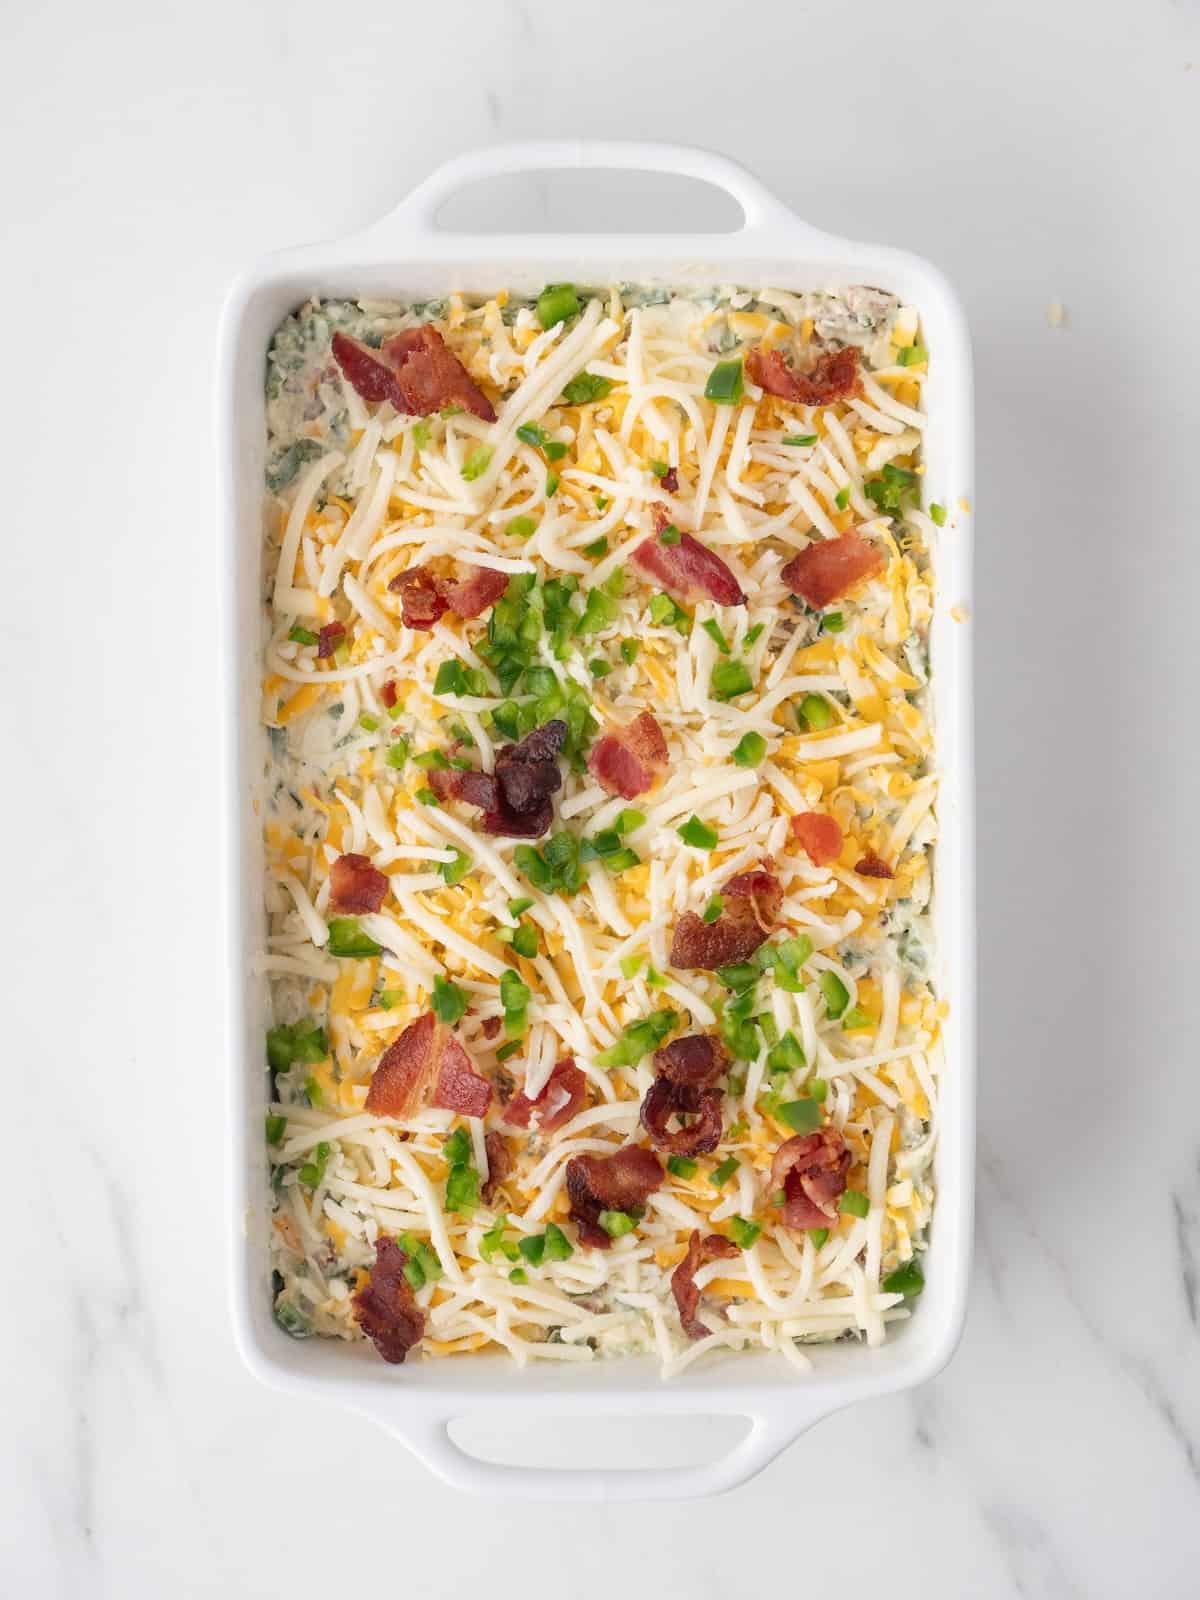 A rectangular white dish with the jalapeño popper dip mix sprinkled with shredded cheese, crumbled bacon and jalapeños on top, ready to go into the oven.